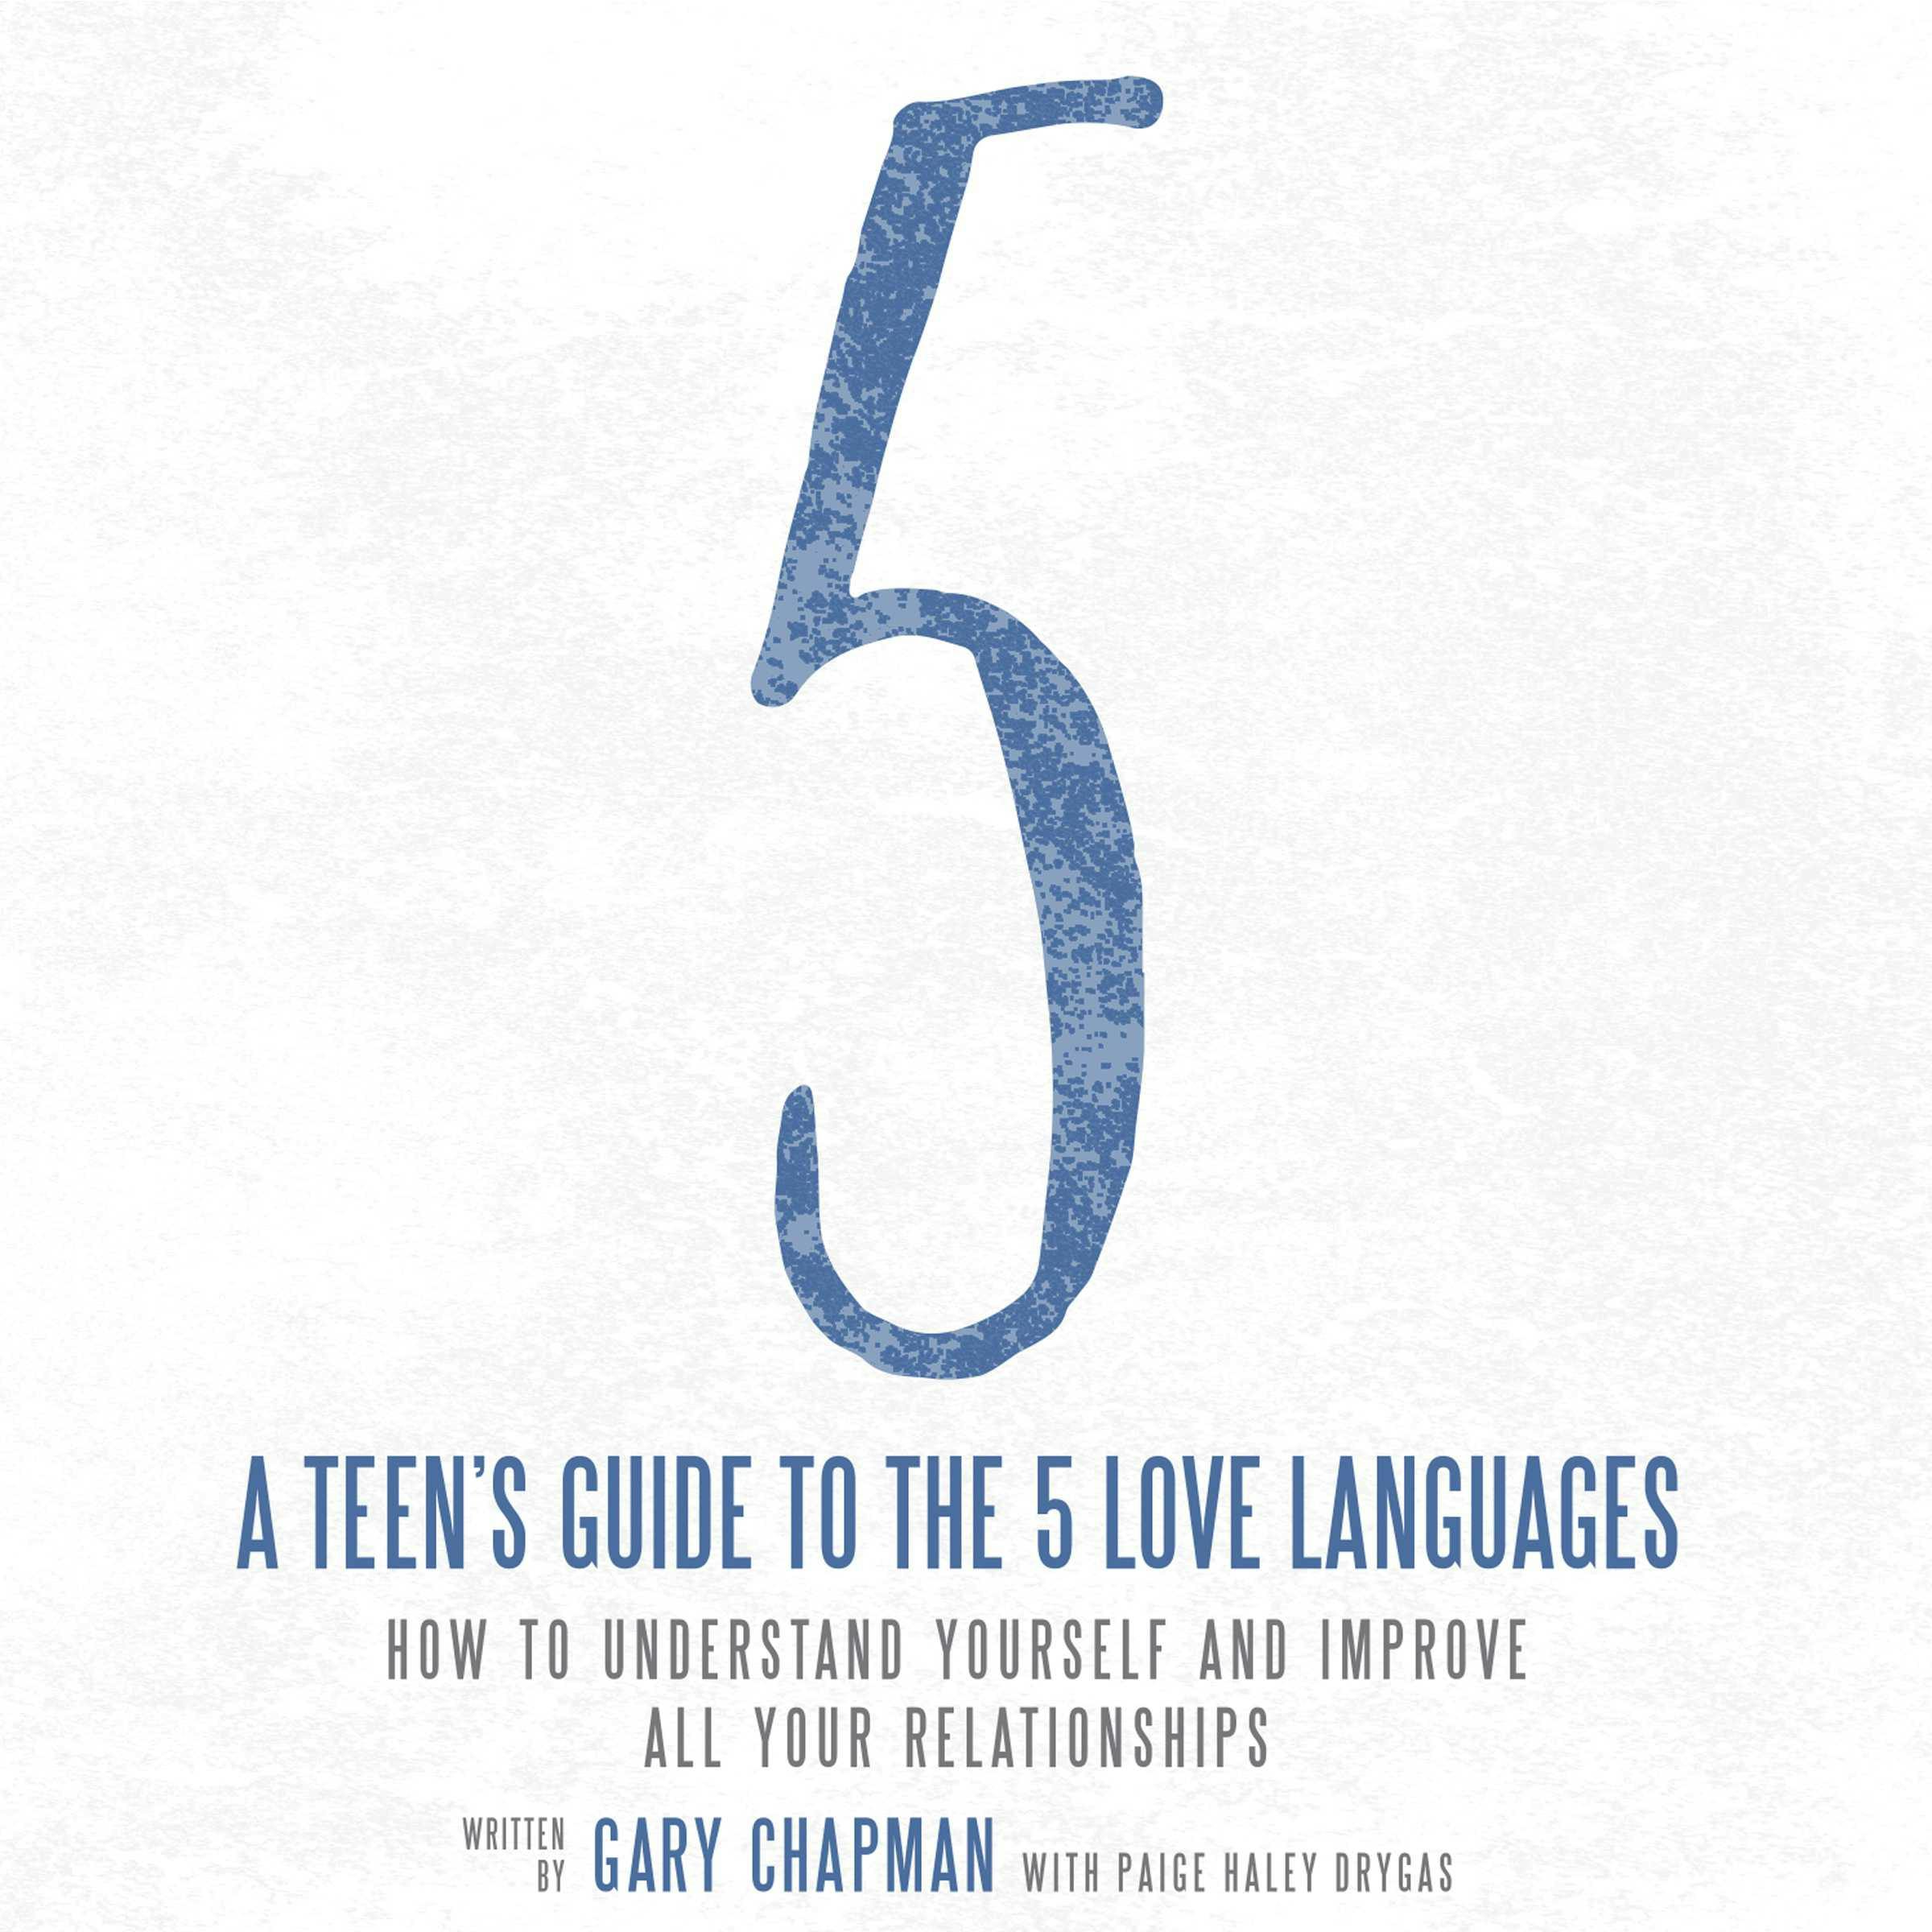 A Teen's Guide to the 5 Love Languages: How to Understand Yourself and Improve All Your Relationships - undefined